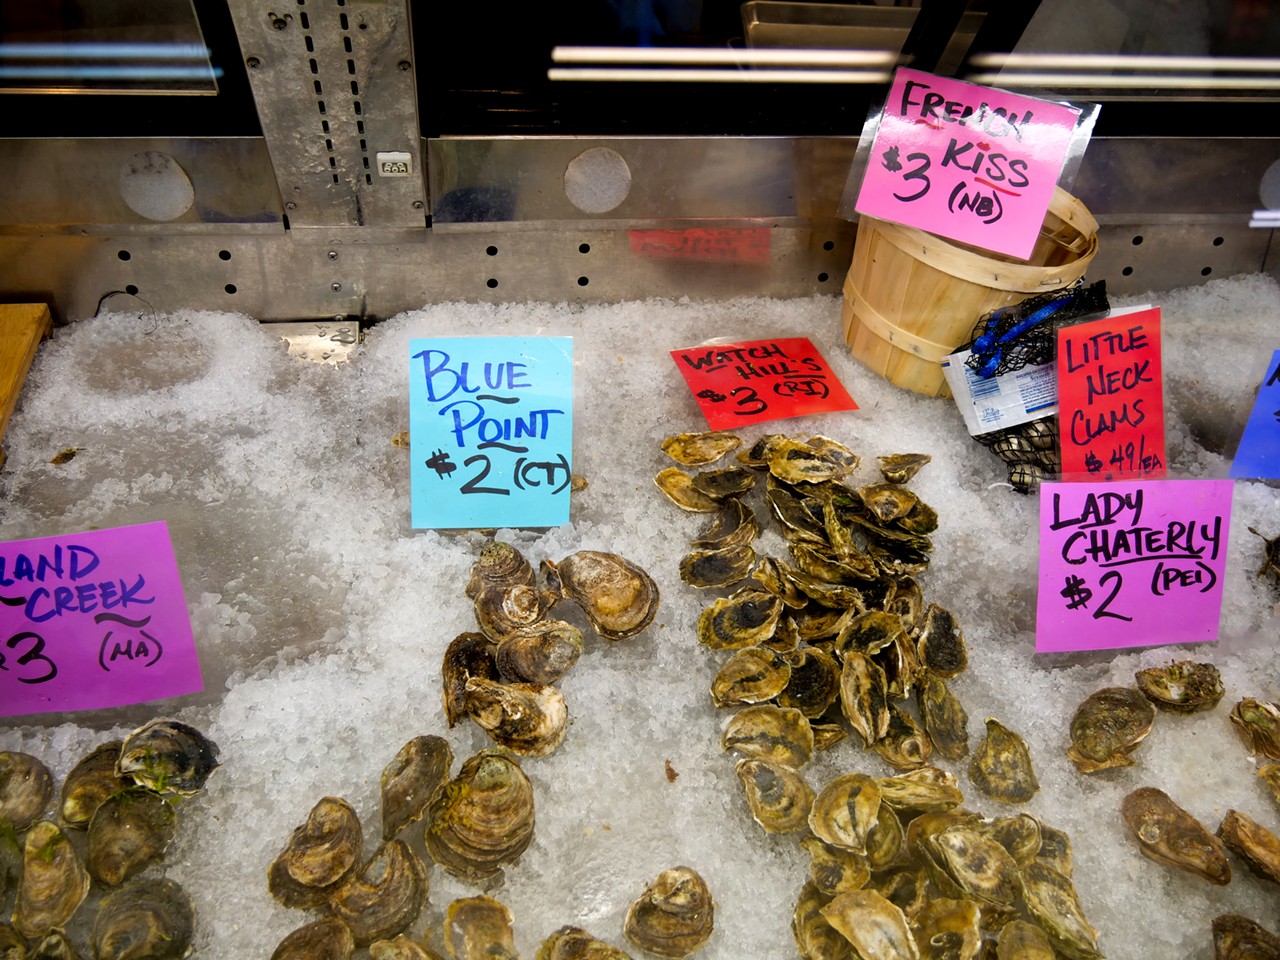 Sen has a rotating oyster selection which can be taken home or eaten at their oyster bar.